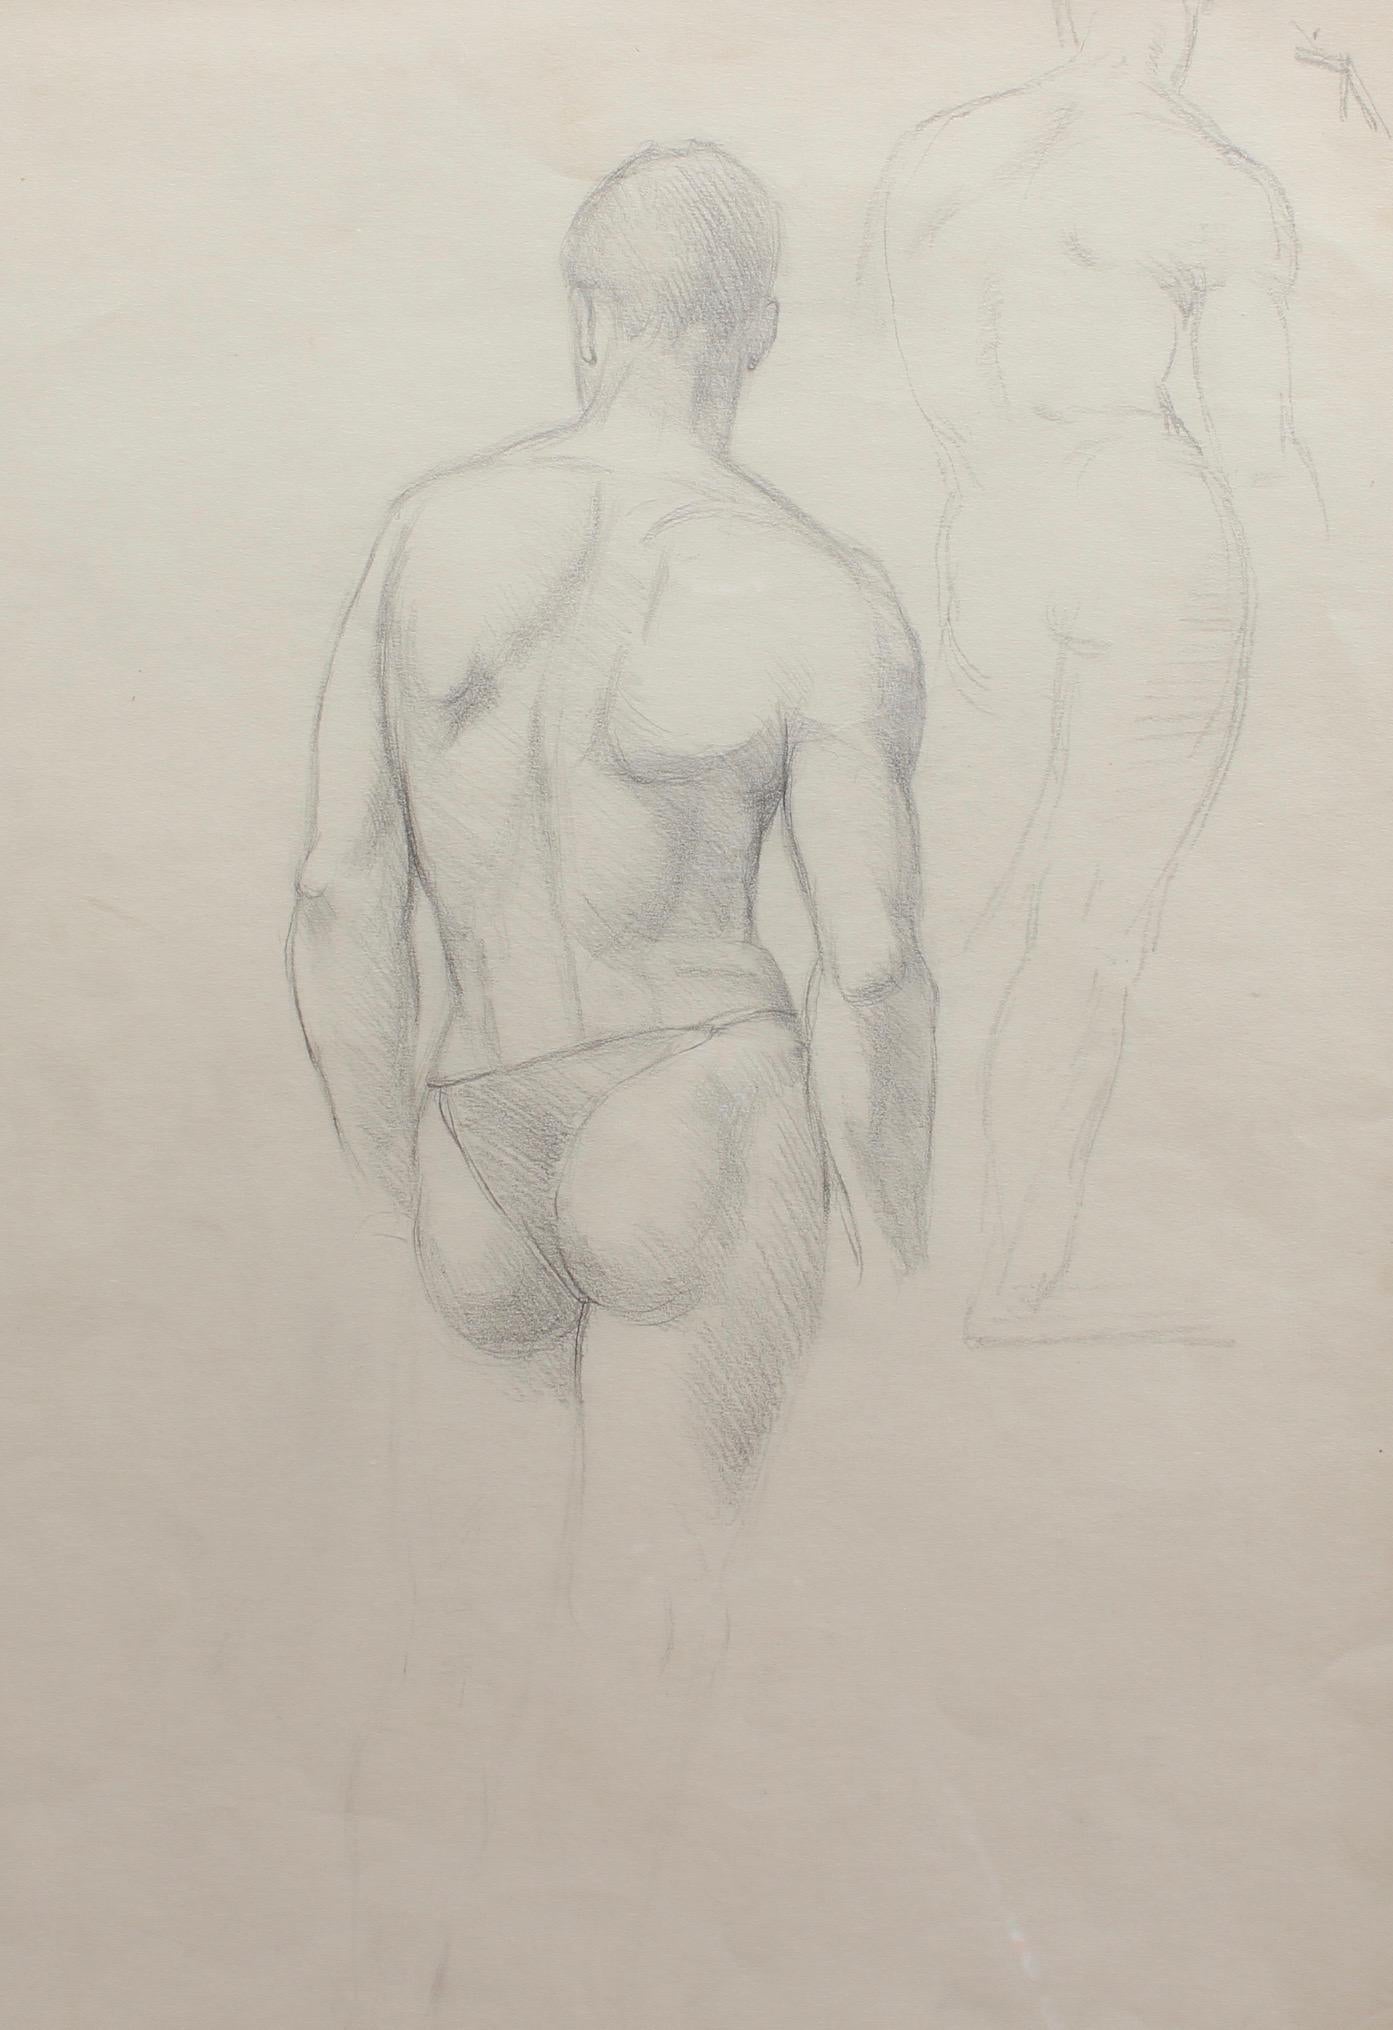 Male Nude pencil drawing on wove paper (circa 1900-1920), by Bernard Sleigh, RBSA (Provenance: from the artist's studio). An exquisite drawing which is possibly a study for a larger work planned by the artist and is, considering its age, very well